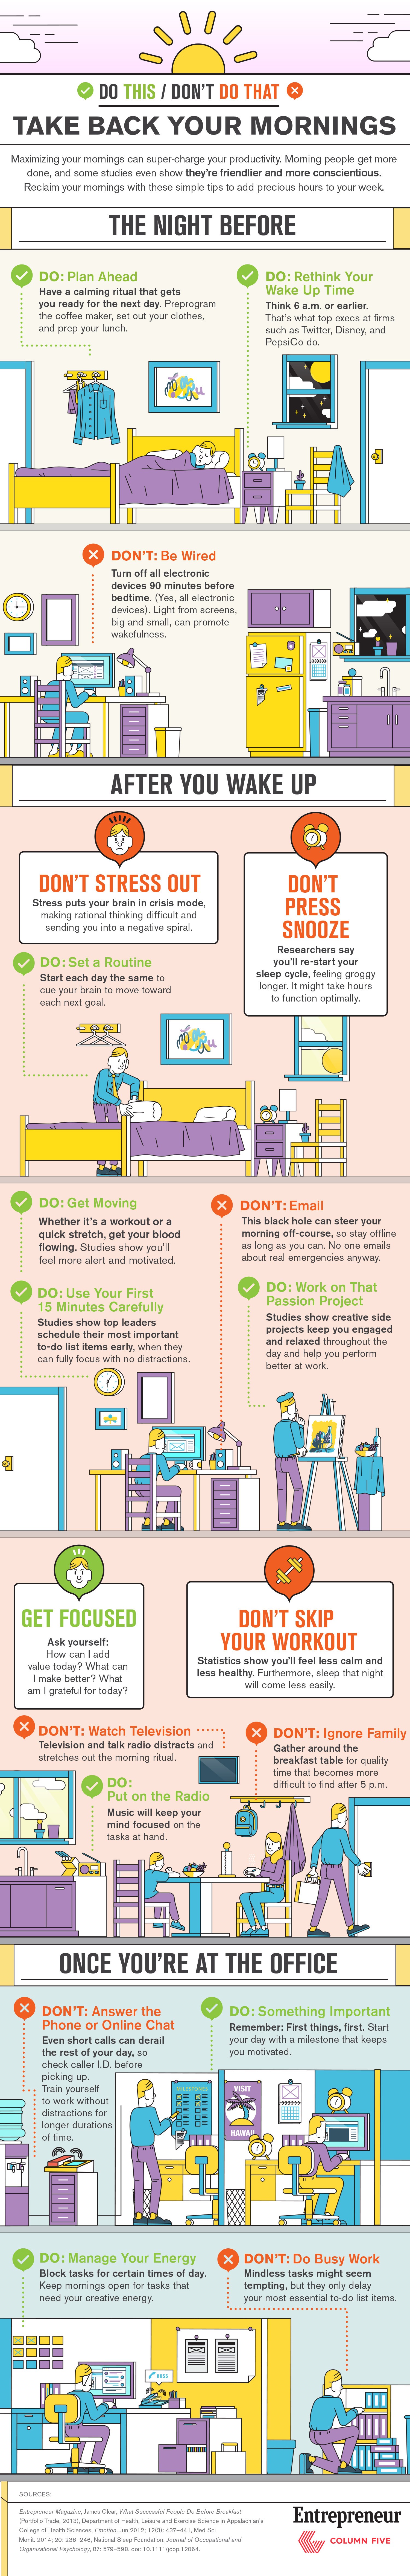 1413563200-take-your-mornings-back-infographic